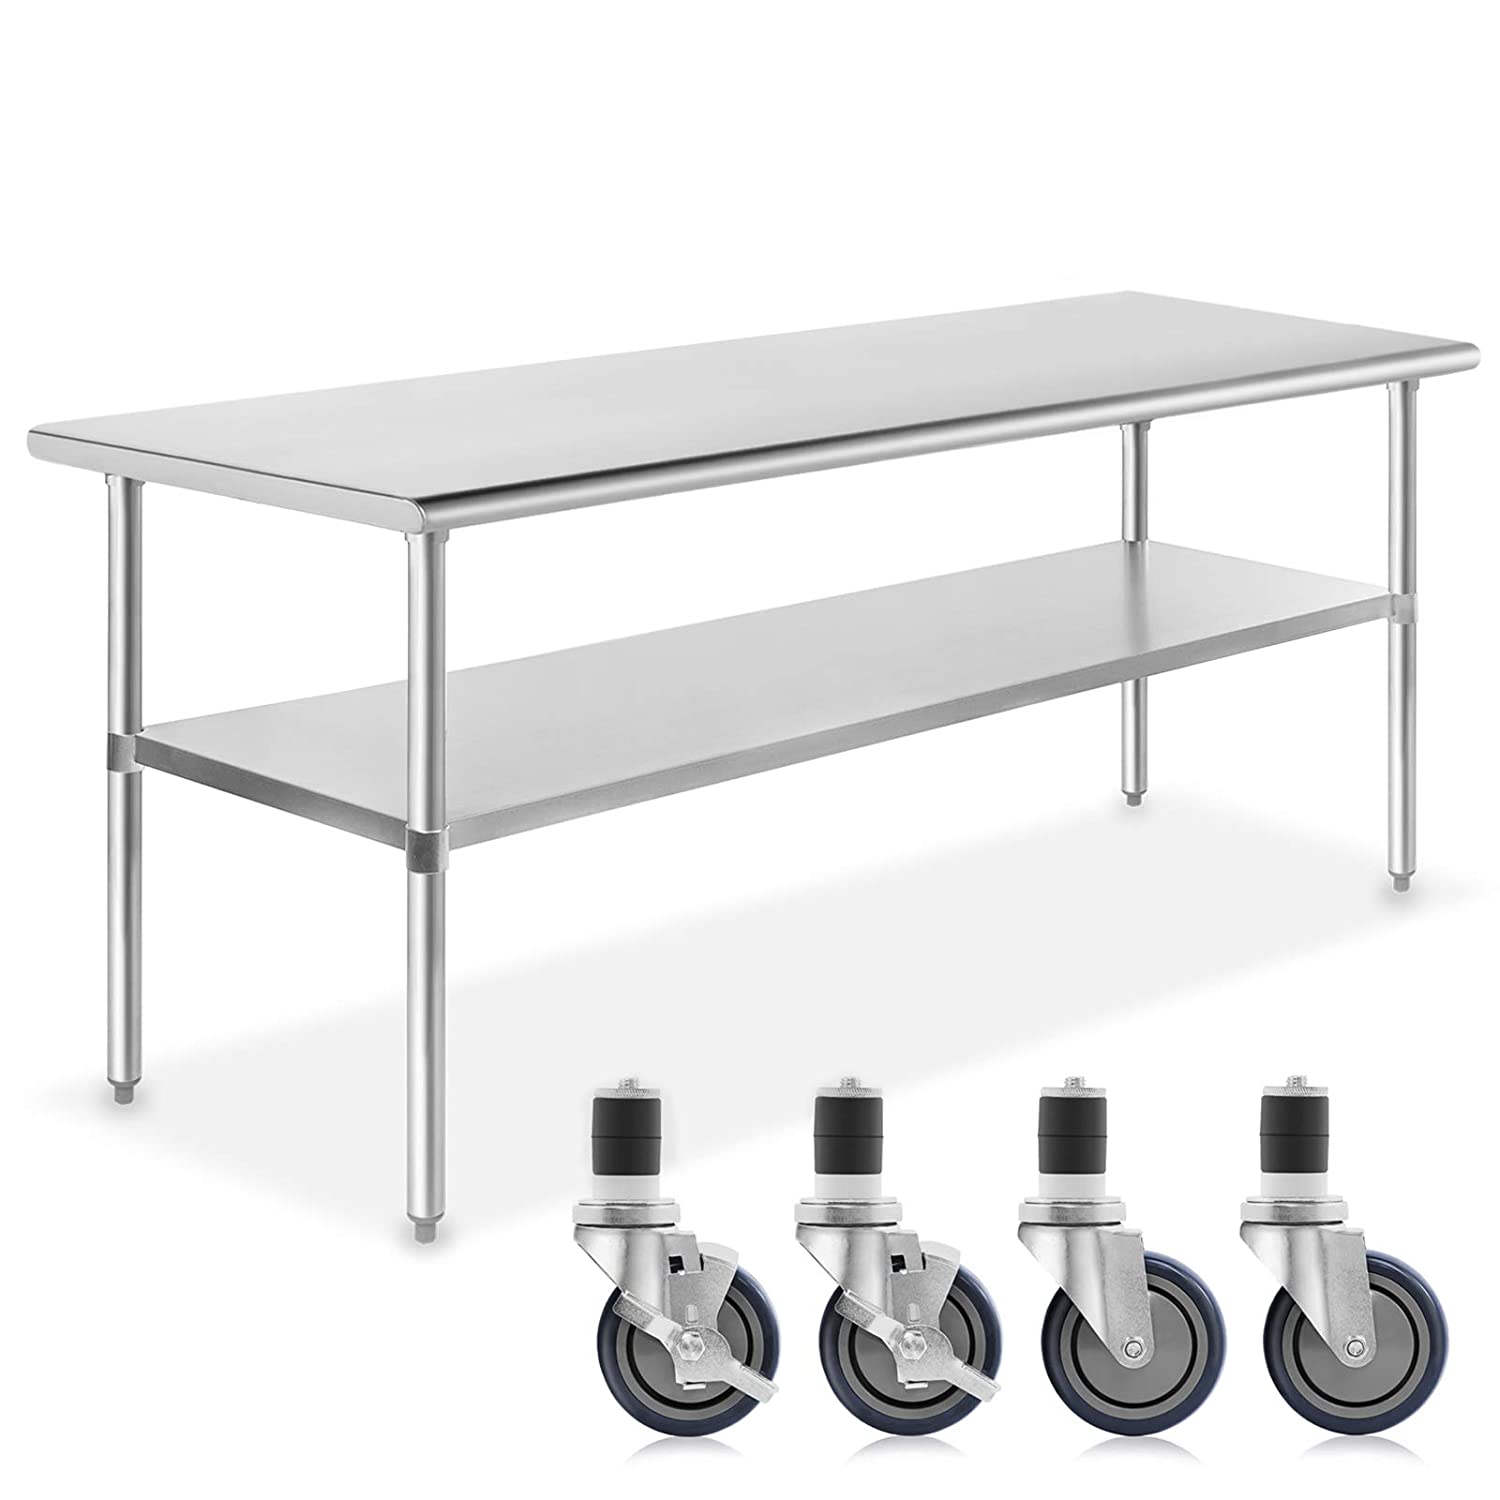 Outdoor prep table with storage - Top 5 best outdoor prep table with Outdoor Stainless Steel Table With Wheels